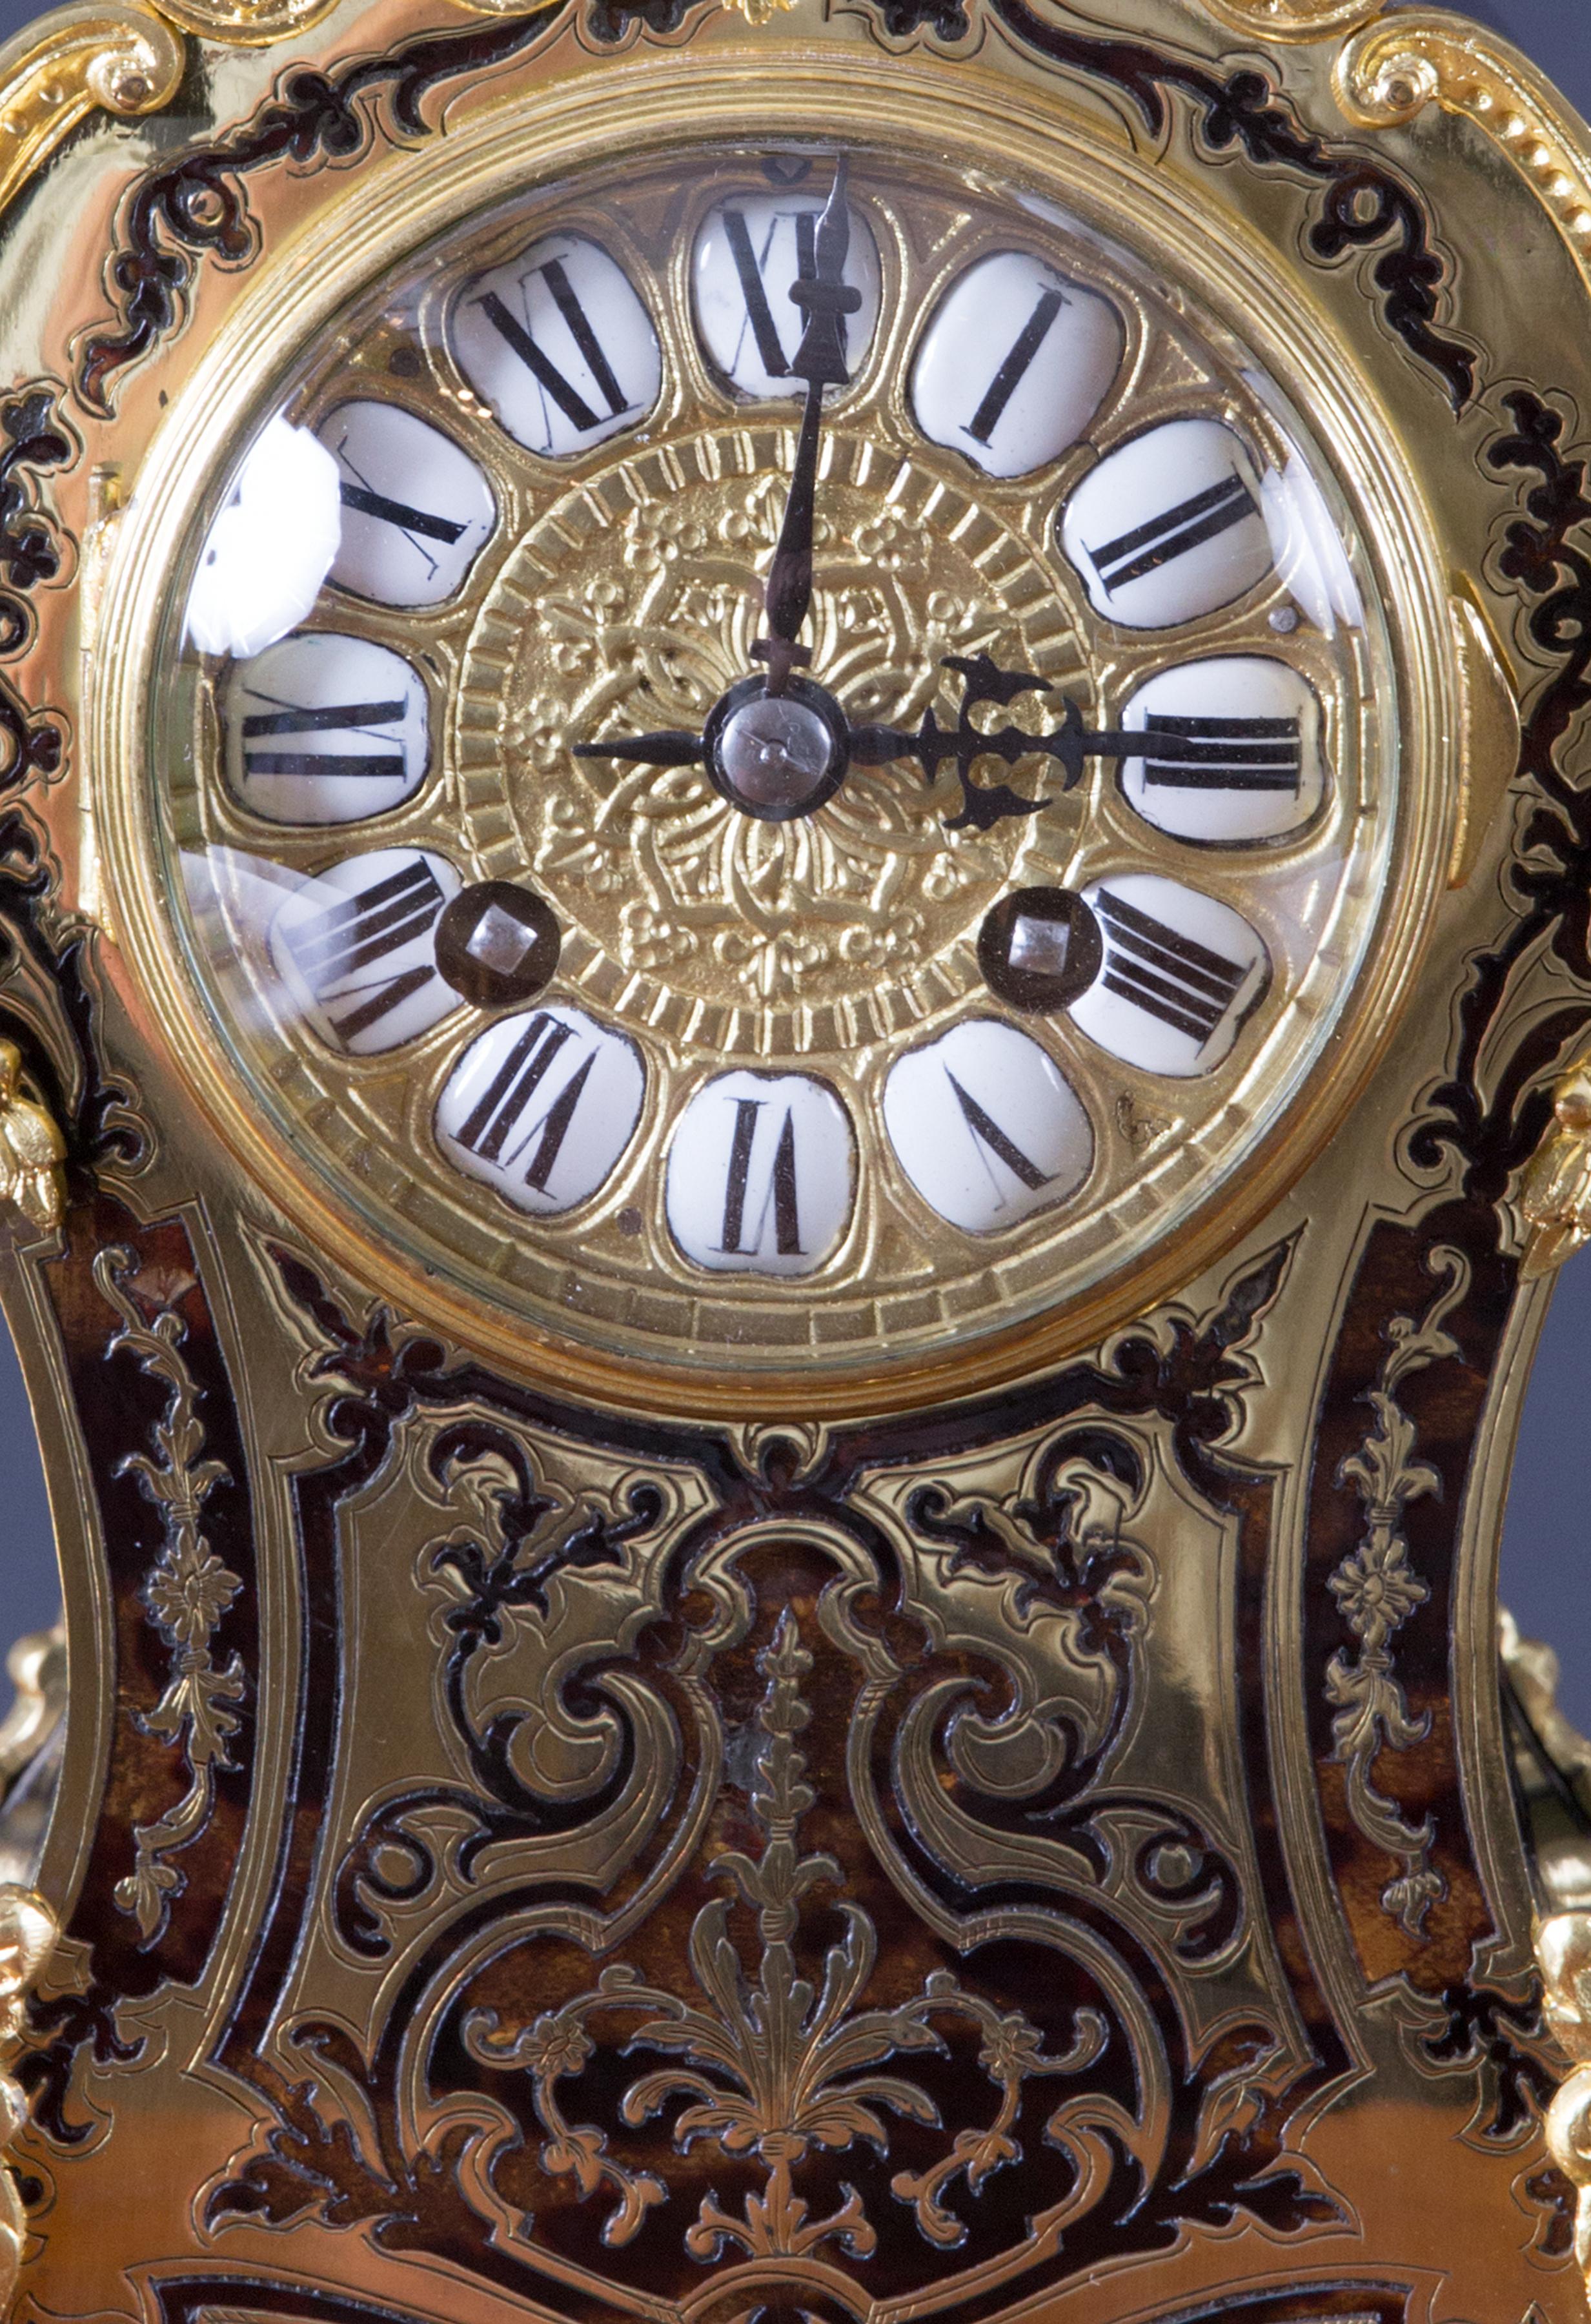 French Tortoiseshell Boulle clock with ormolu mounts surmounted by a brass finial.

Gilded dial with individual enamel segmented Roman numerals.

Eight day movement striking the hours and halves on a coiled gong, rear door with silk lined sound